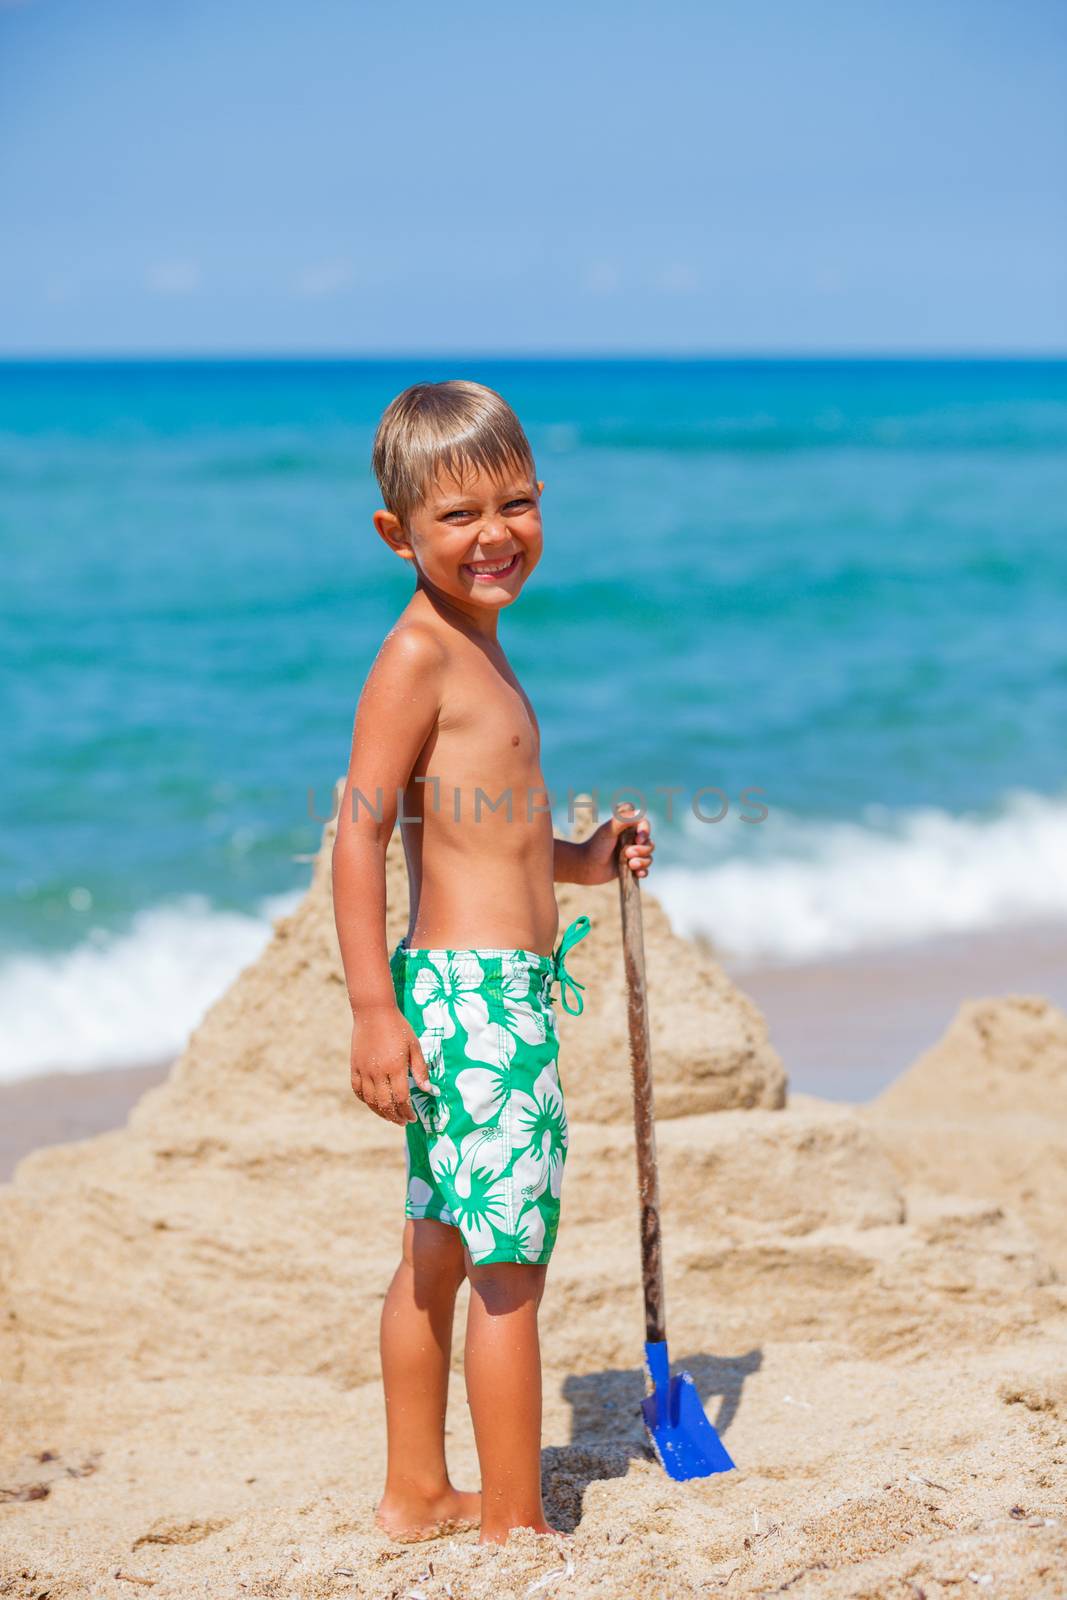 Young boy playing in the sand on the beach